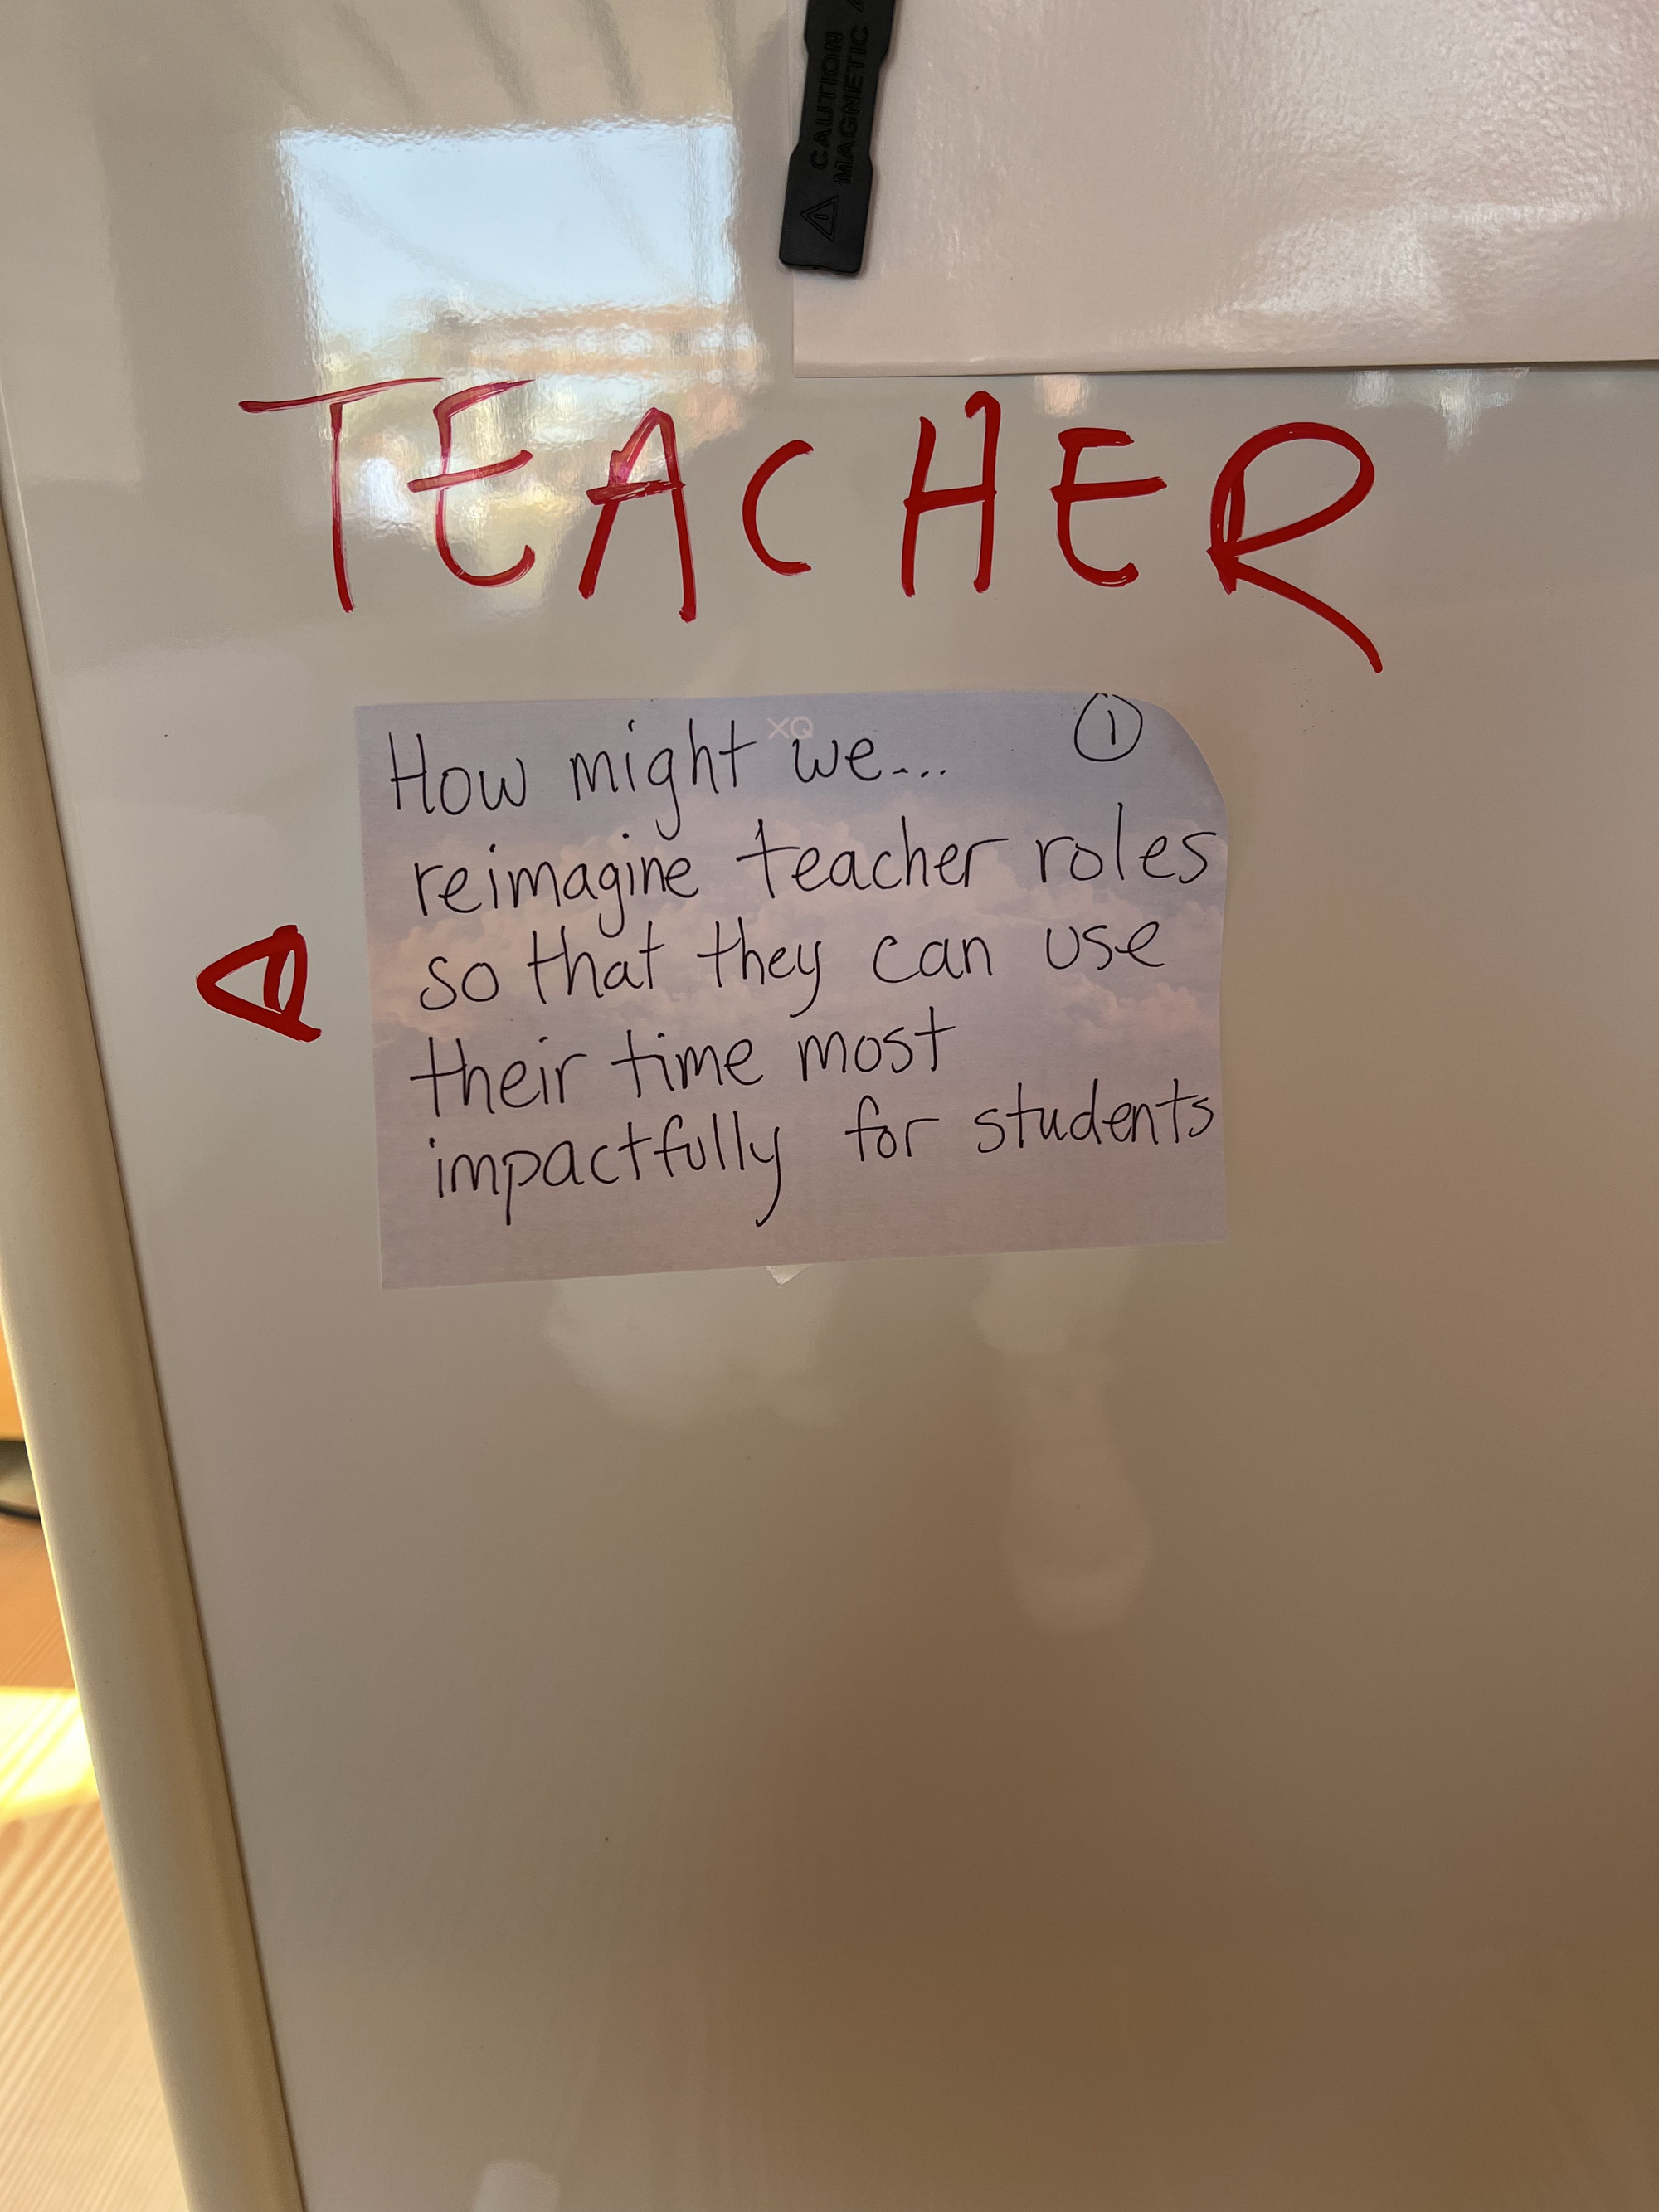 Reframing the teacher-centered problem: How might we reimagine teacher roles so that they can use their time most impactfully for students 